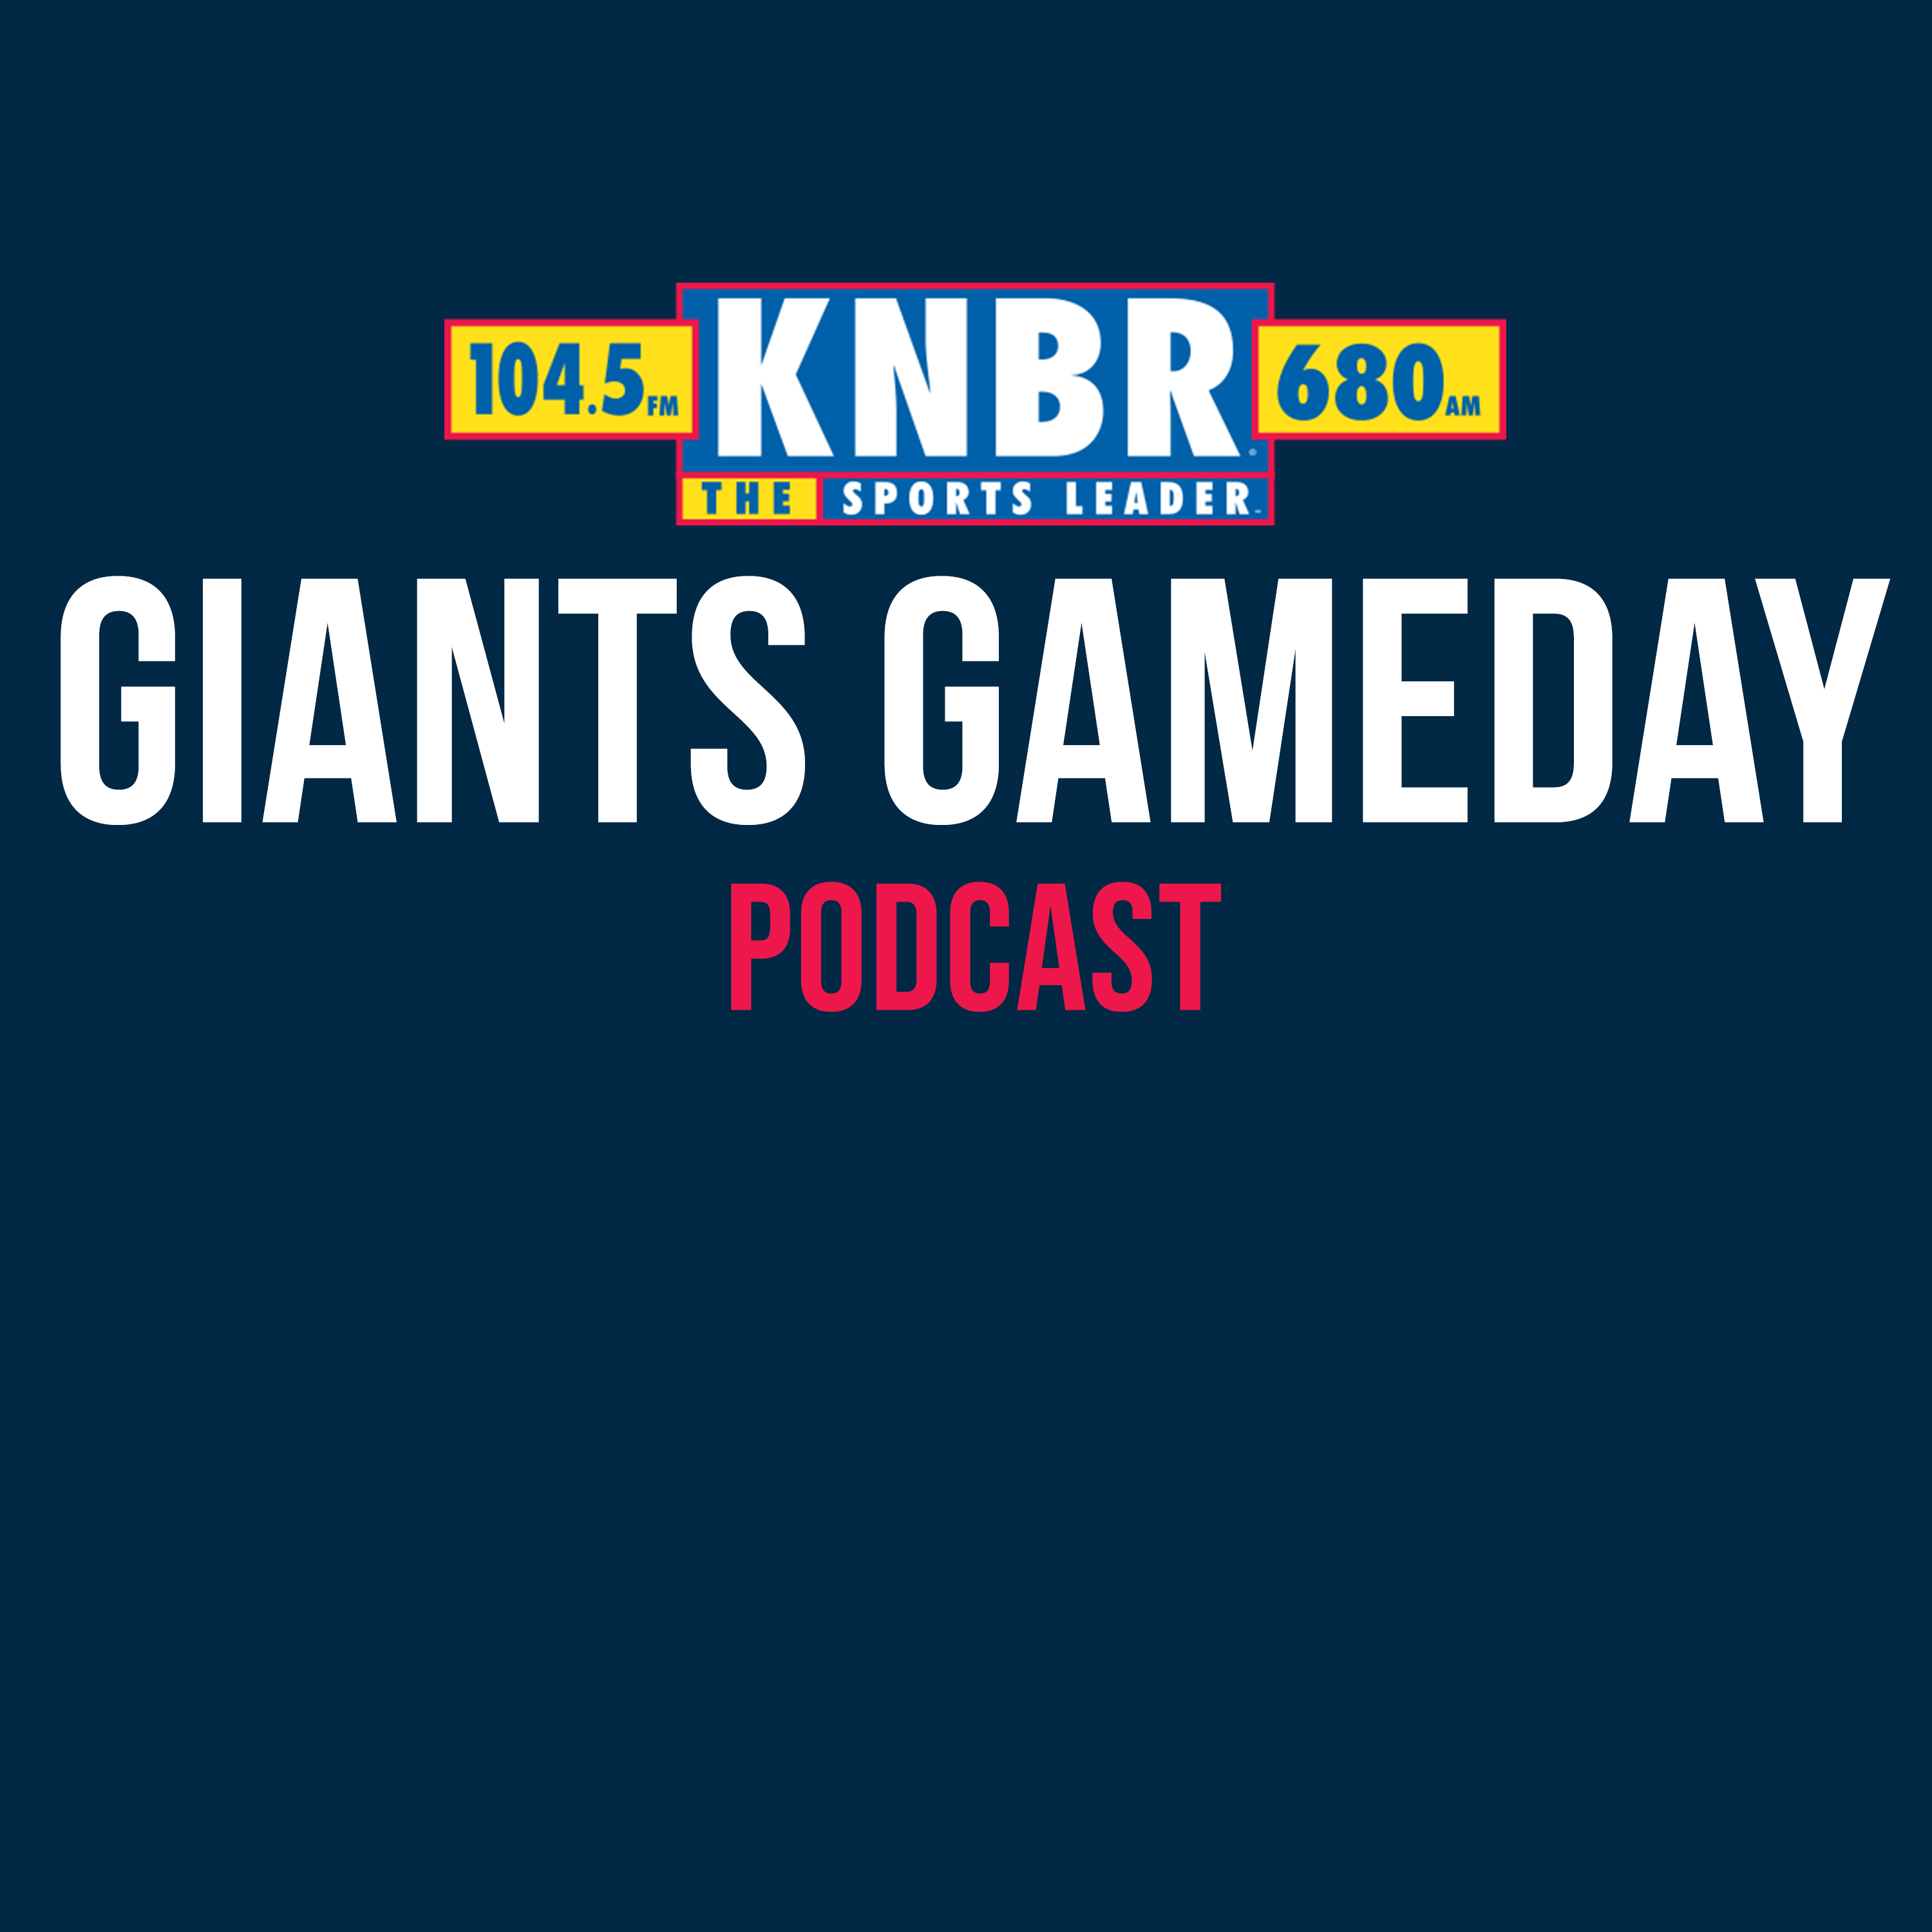 9-2 Postgame Highlights: Giants 5, Brewers 1